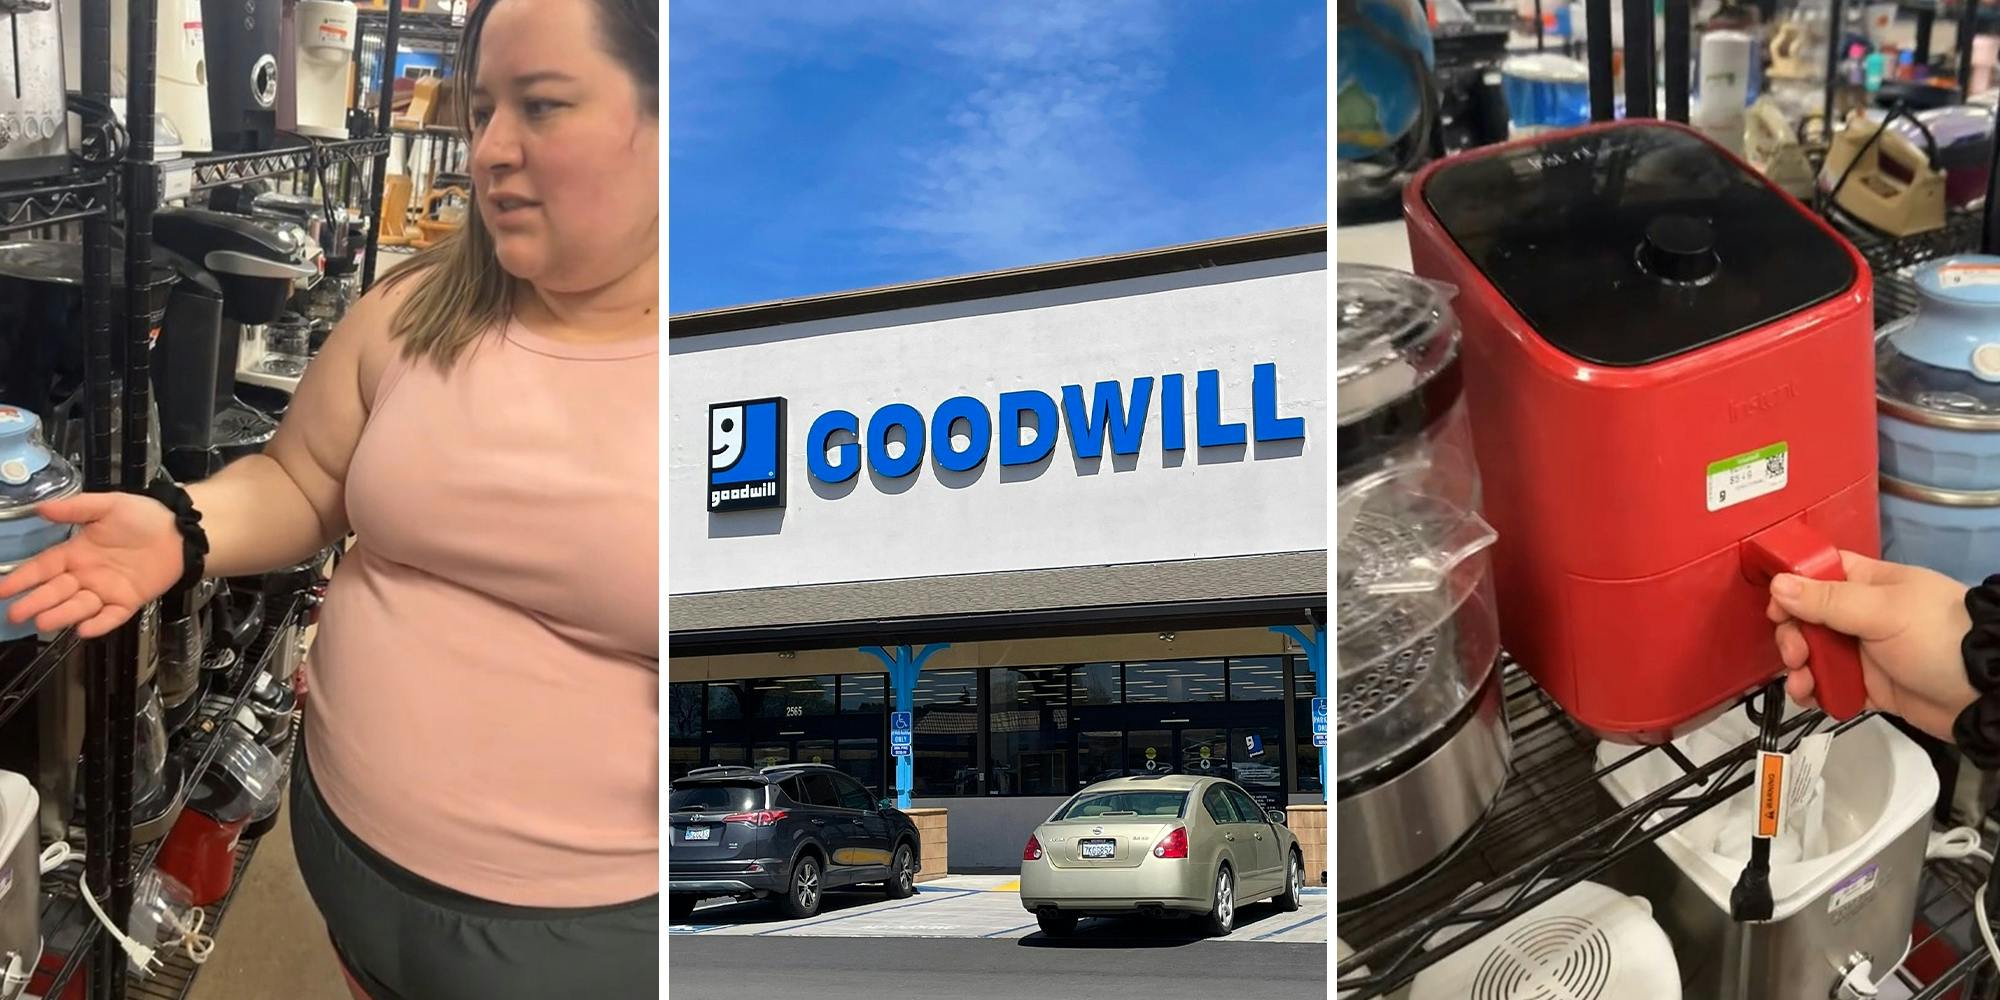 Goodwill shopper stunned to find Instant Pot air fryer for $5